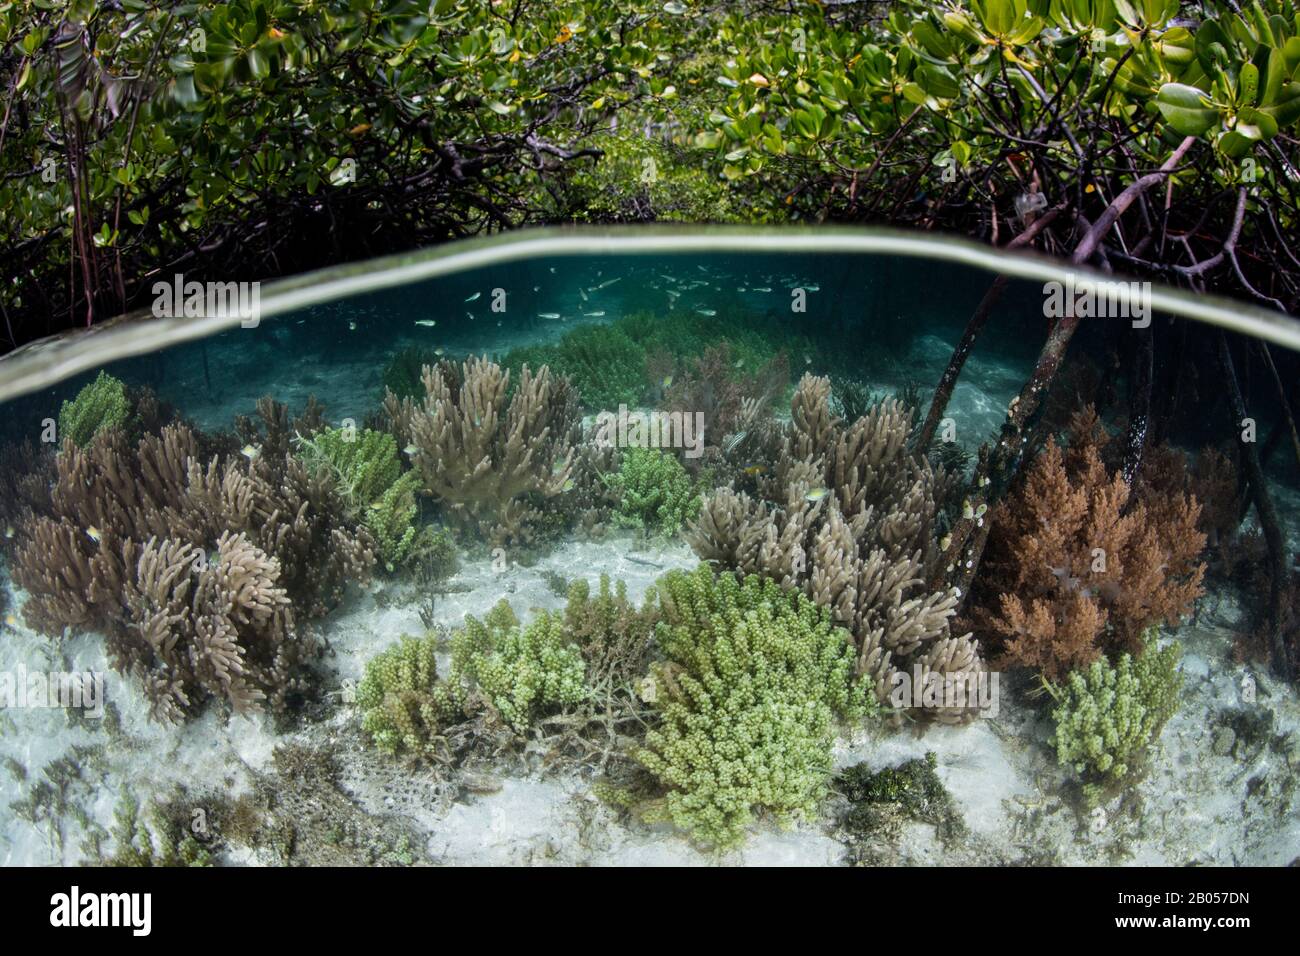 Corals and algae grows along the edge of a blue water mangrove forest in Raja Ampat, Indonesia. This tropical area is known for its high biodiversity. Stock Photo